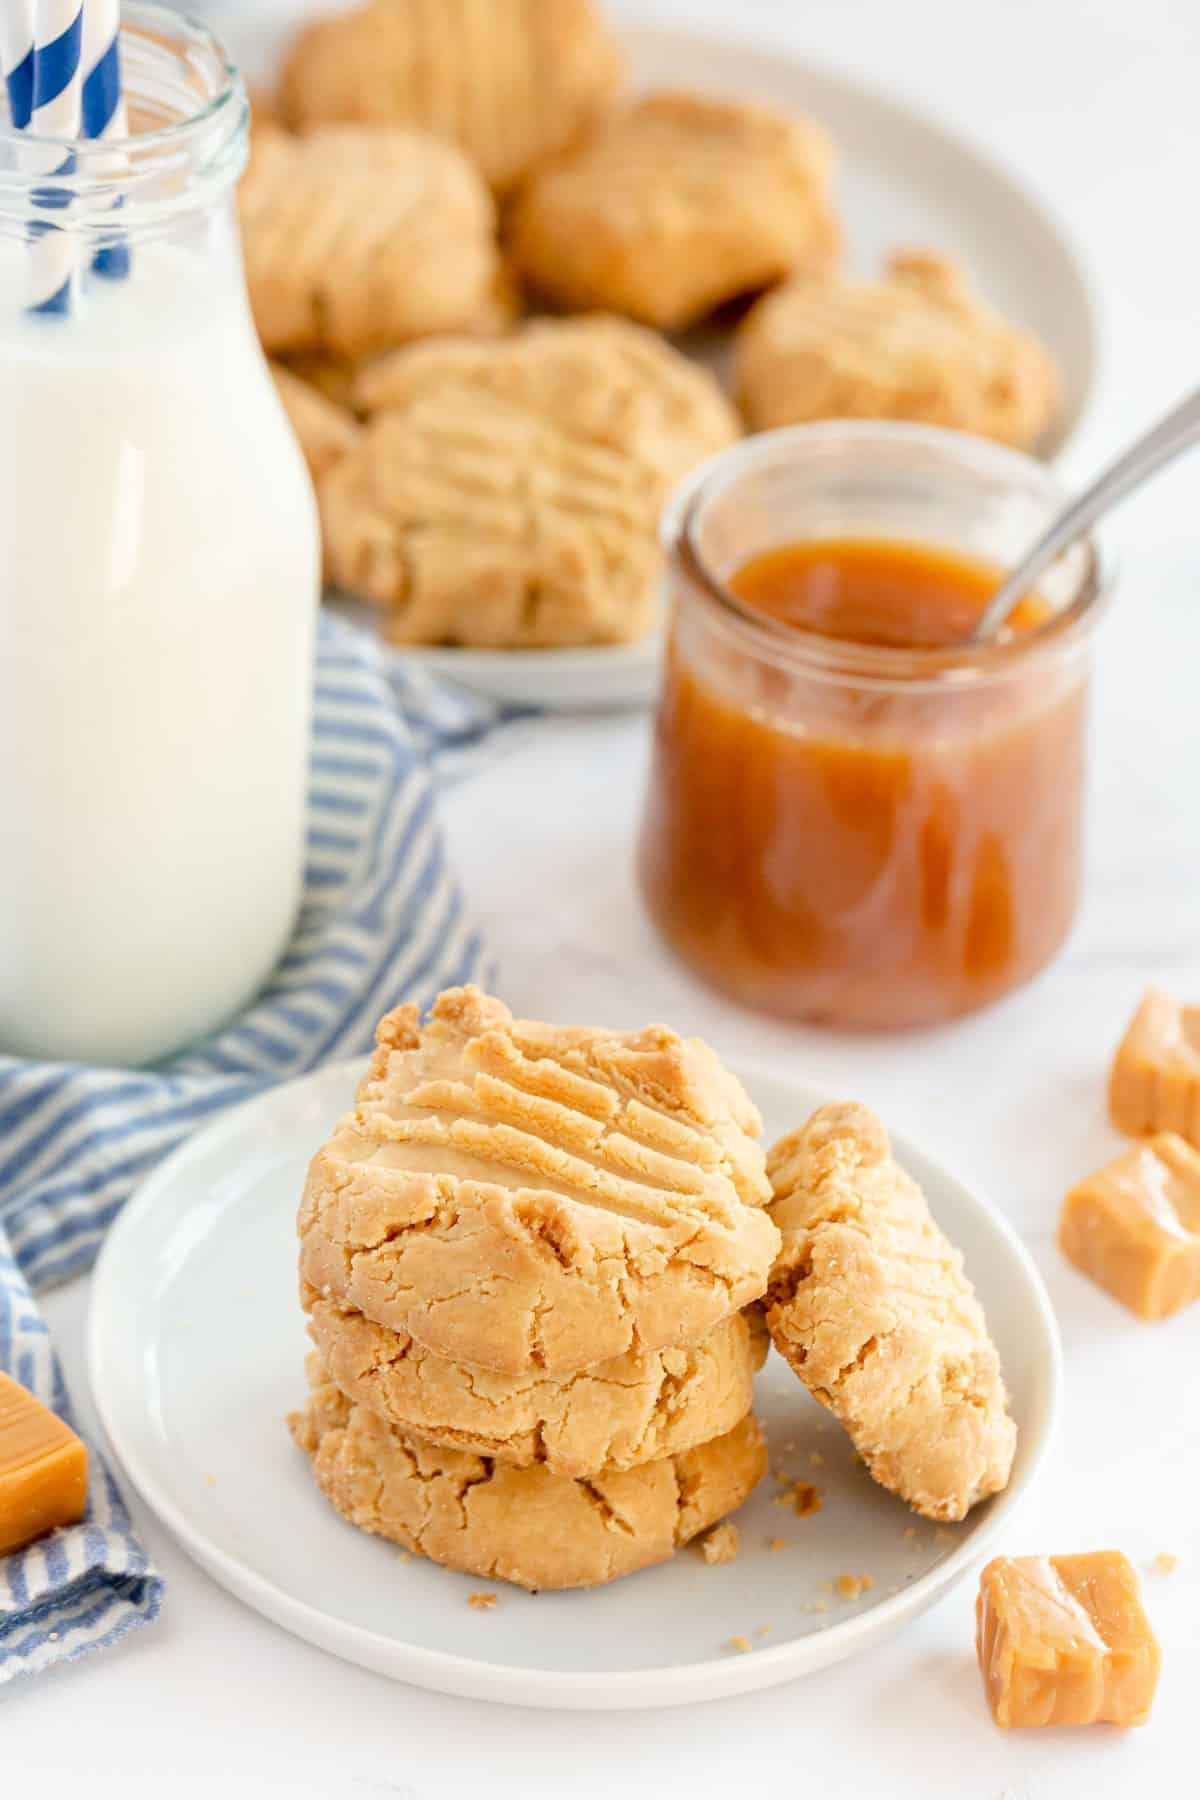 caramel cookies on a white plate with a bottle of milk